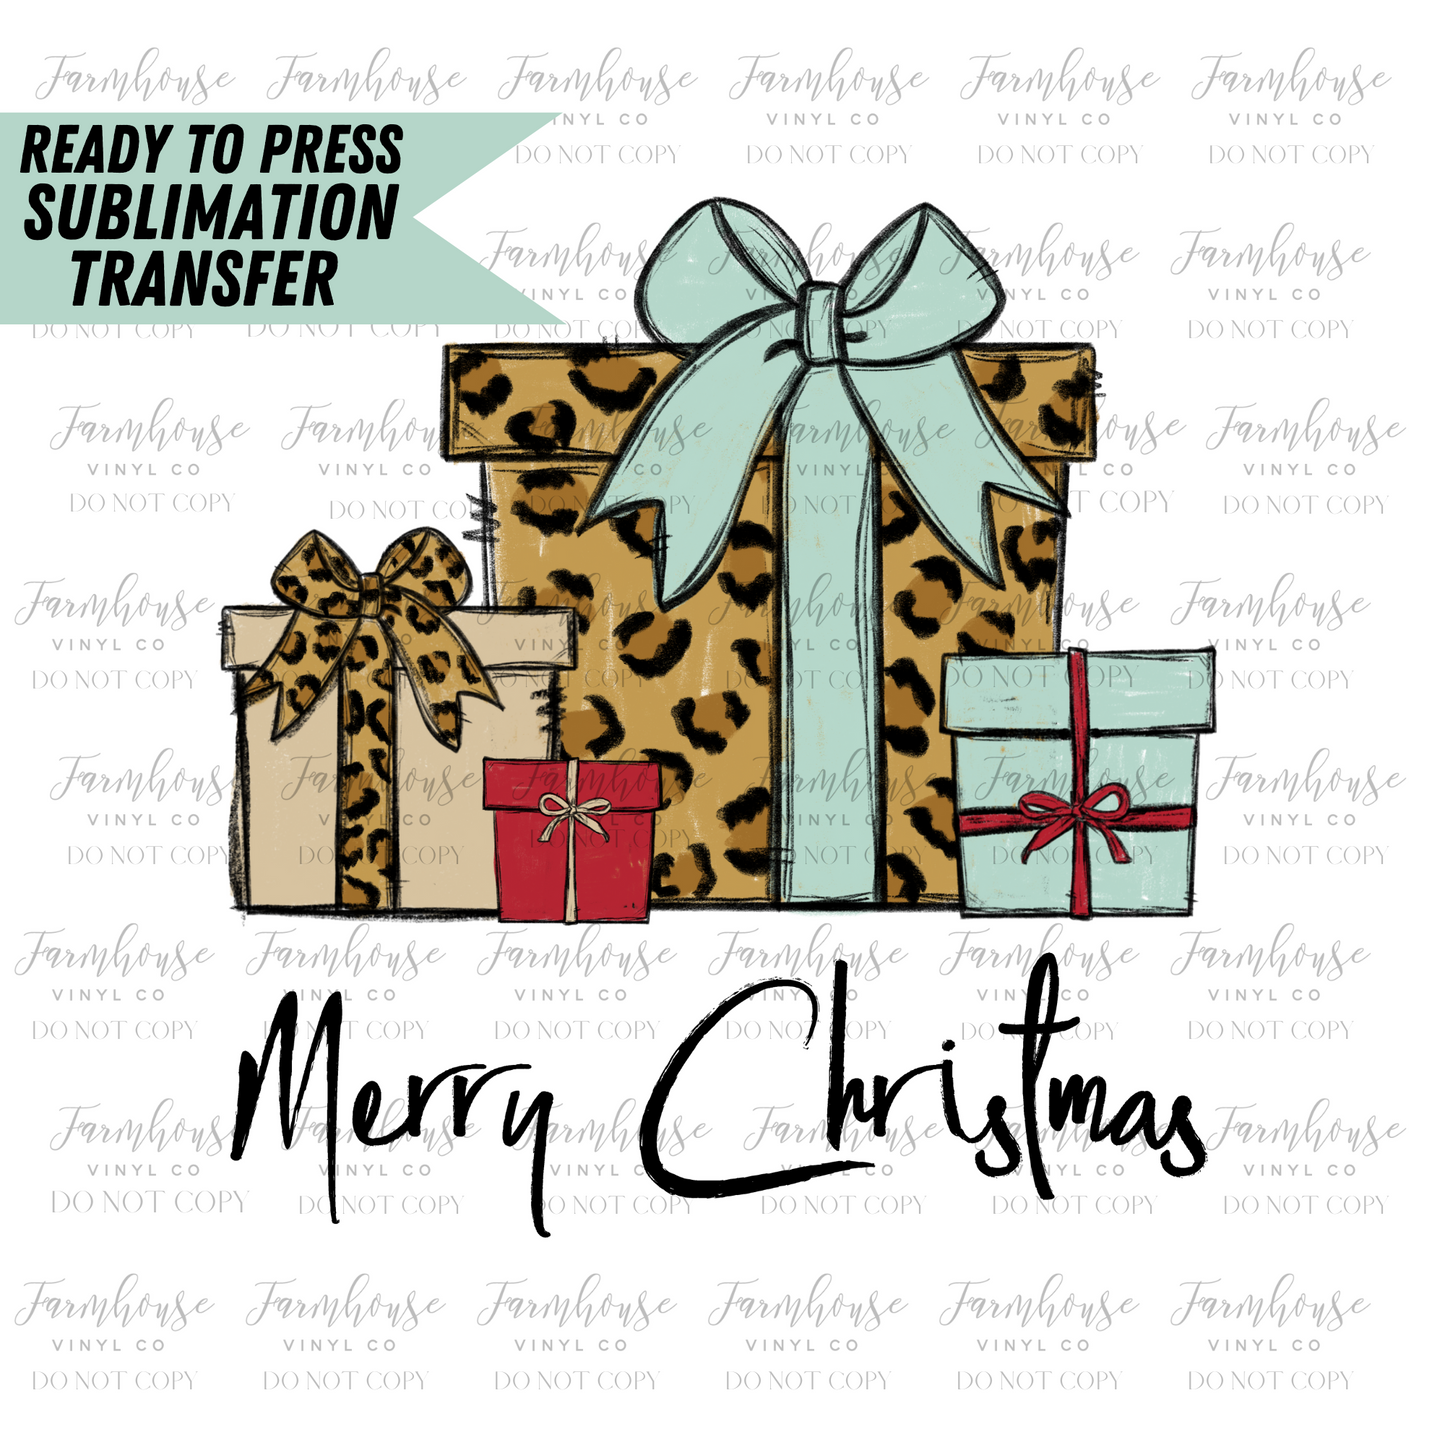 Merry Christmas Leopard Christmas Gifts Ready To Press Sublimation Transfer - Farmhouse Vinyl Co